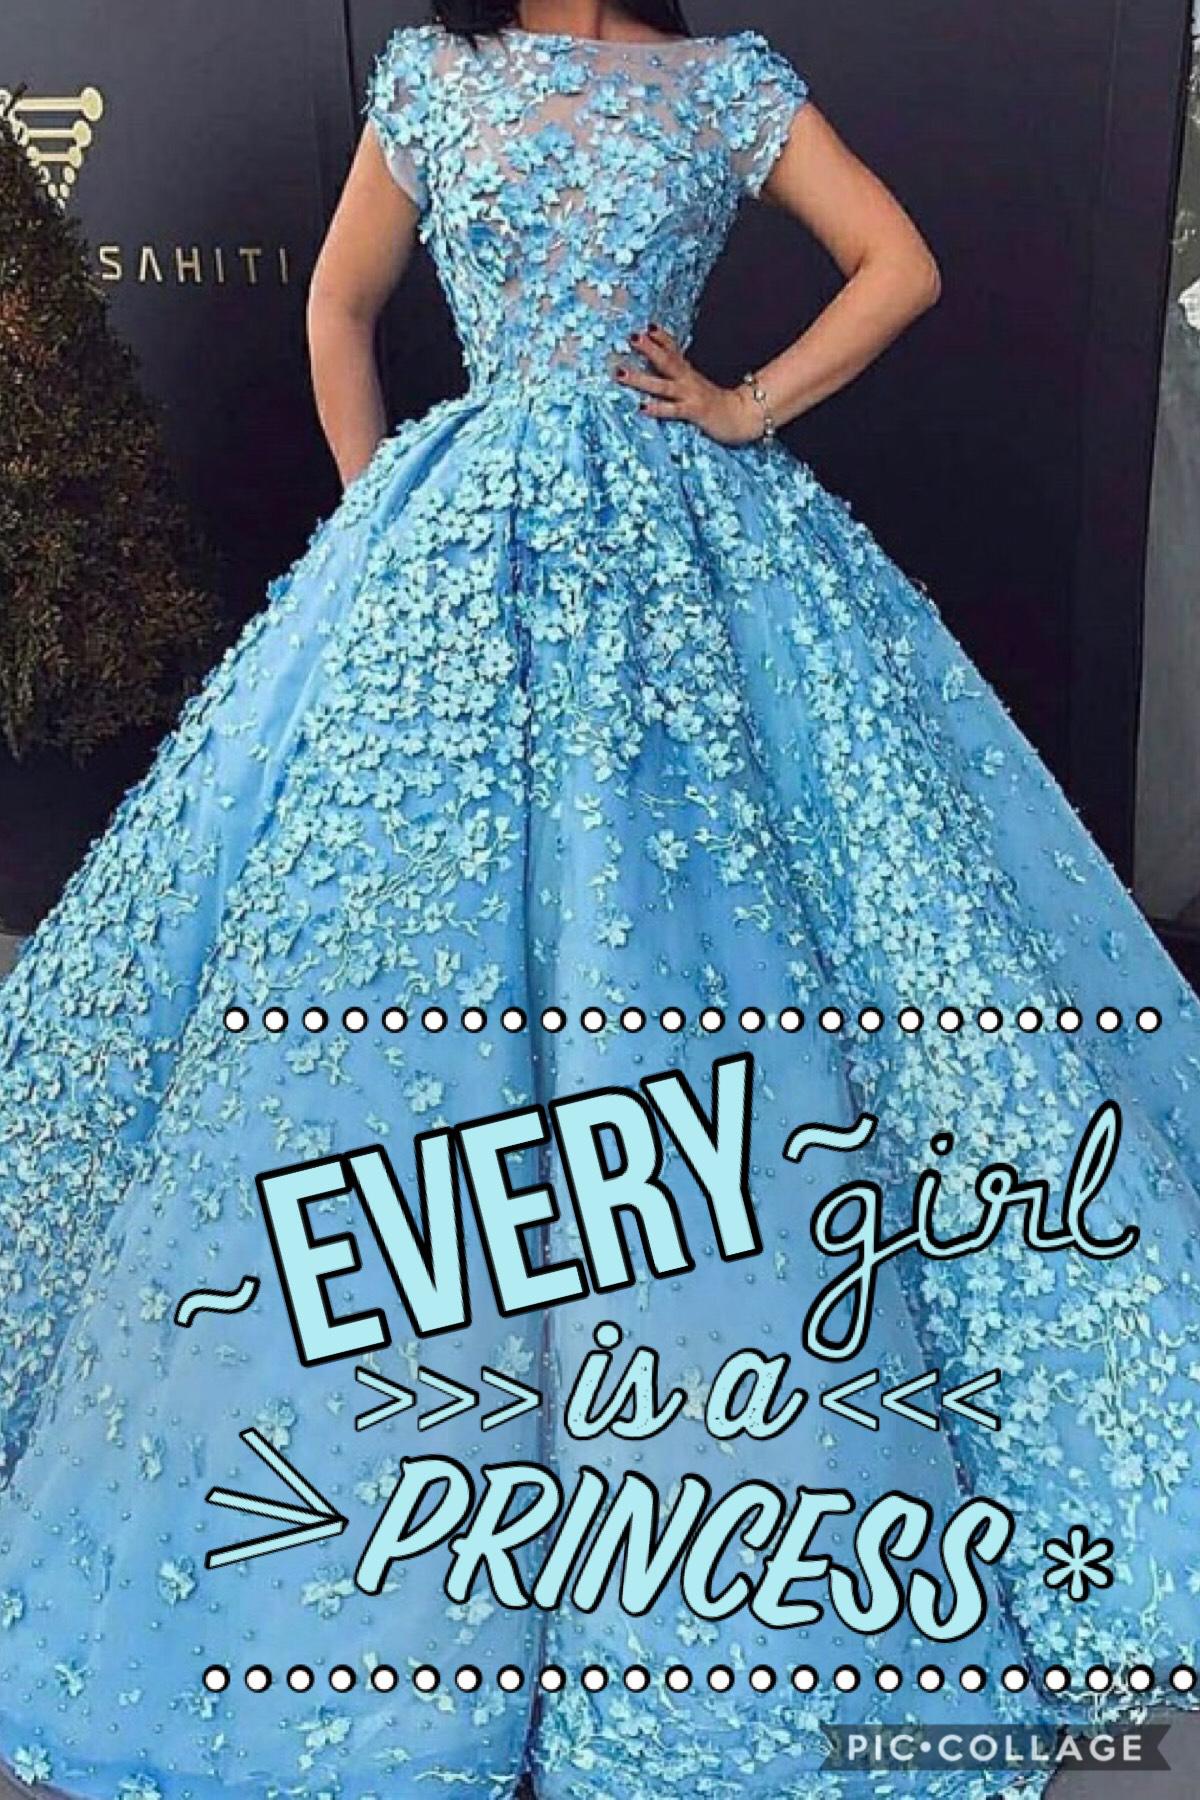 🦋this dress is gorgeous😱